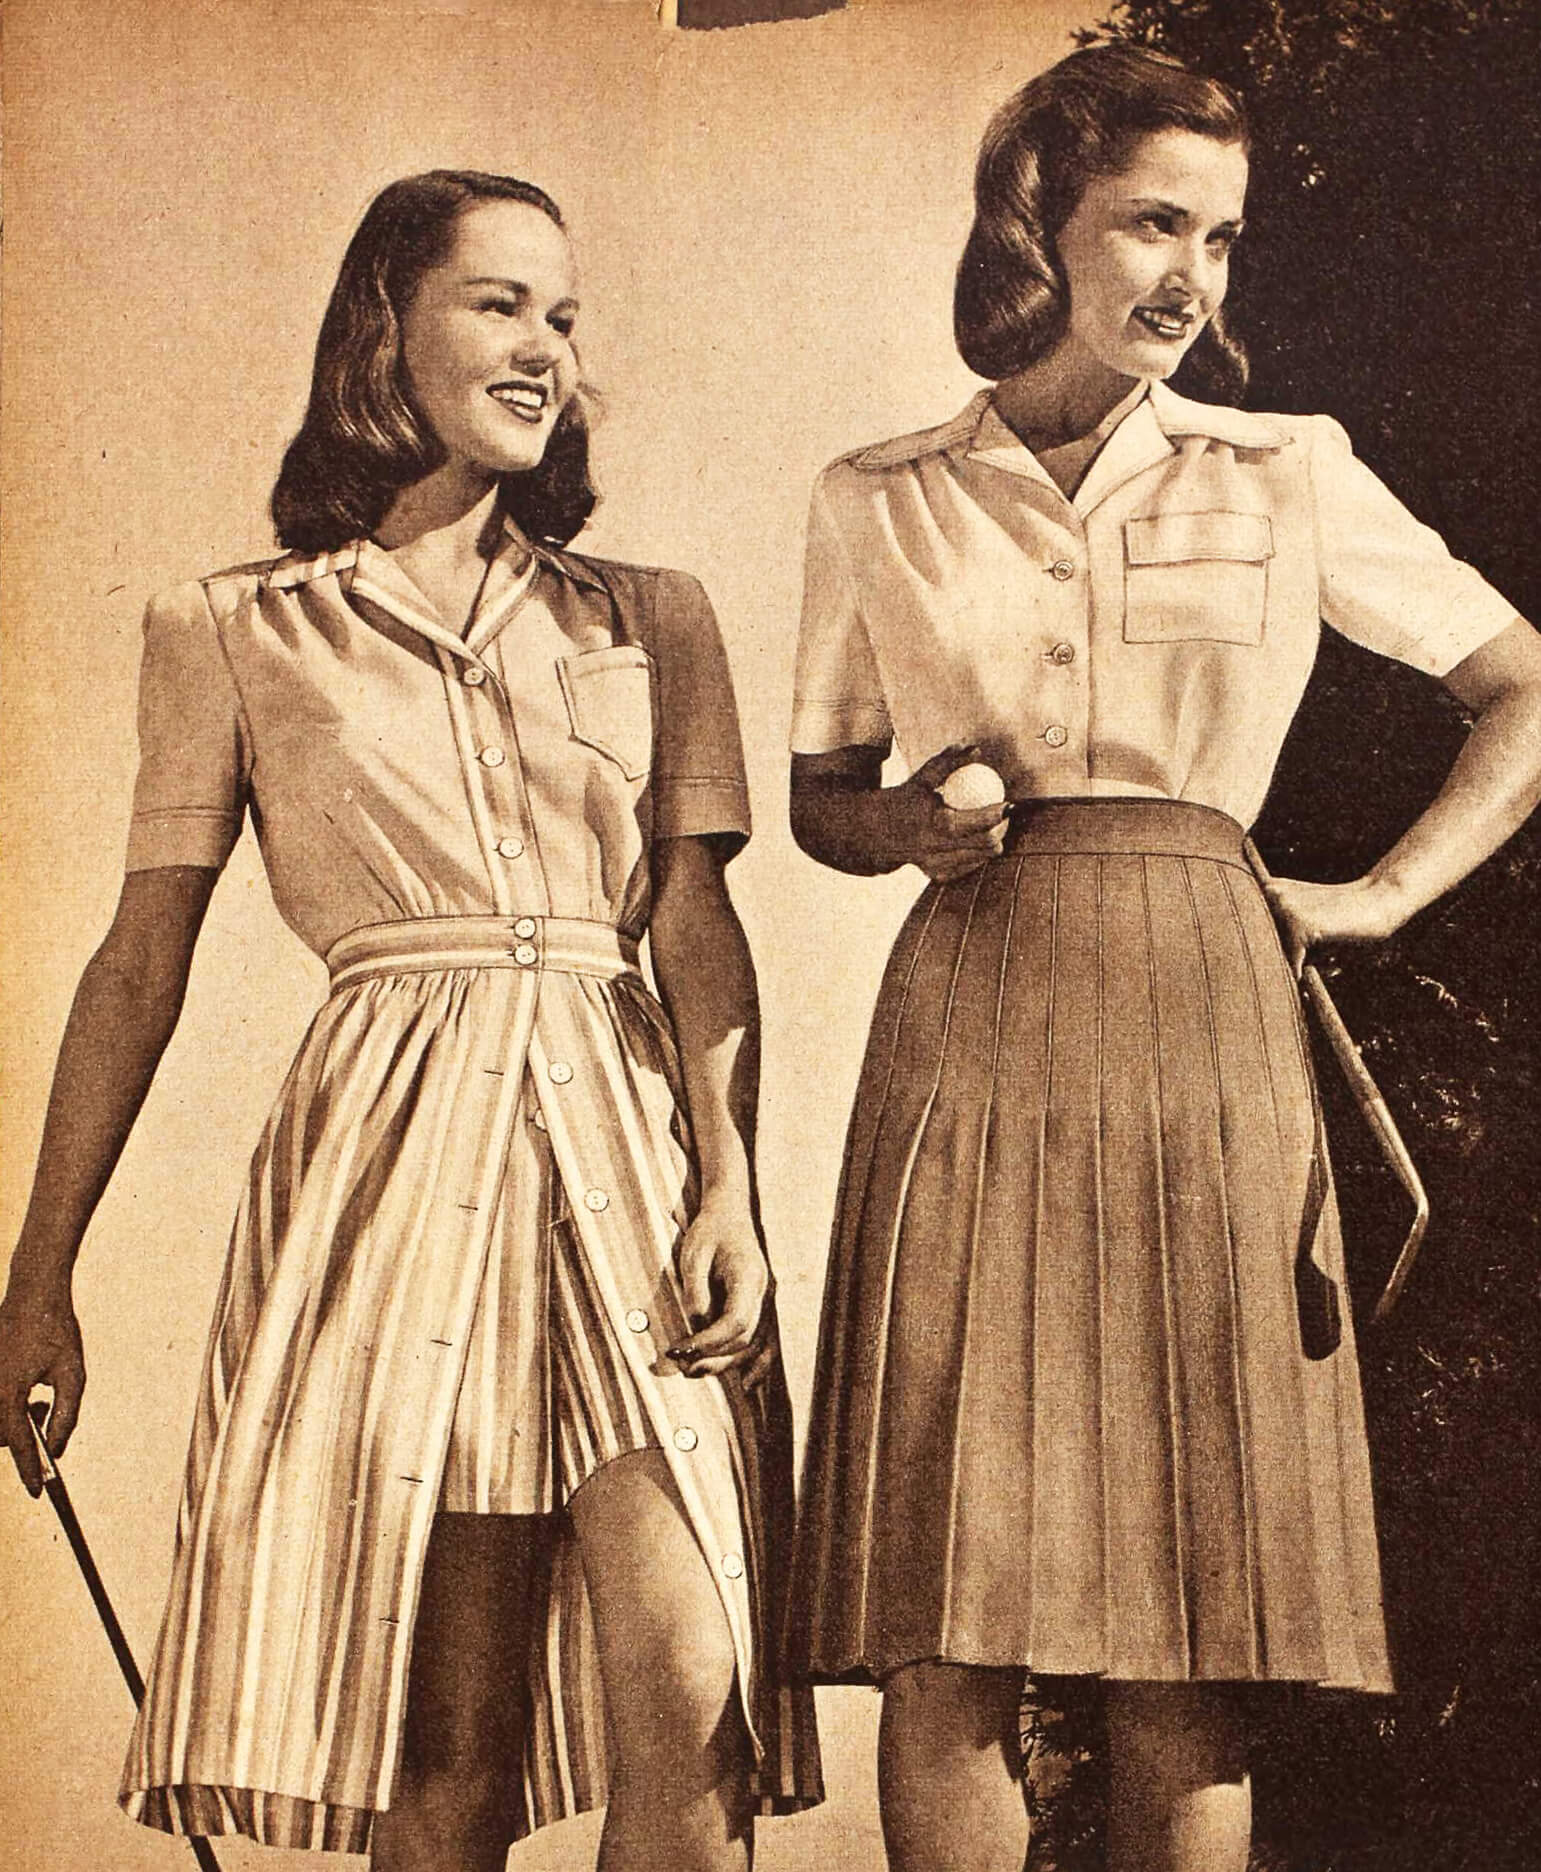 12 Outdoor sports clothes, Sears Roebuck Catalog, 1945 – The Vintage Woman